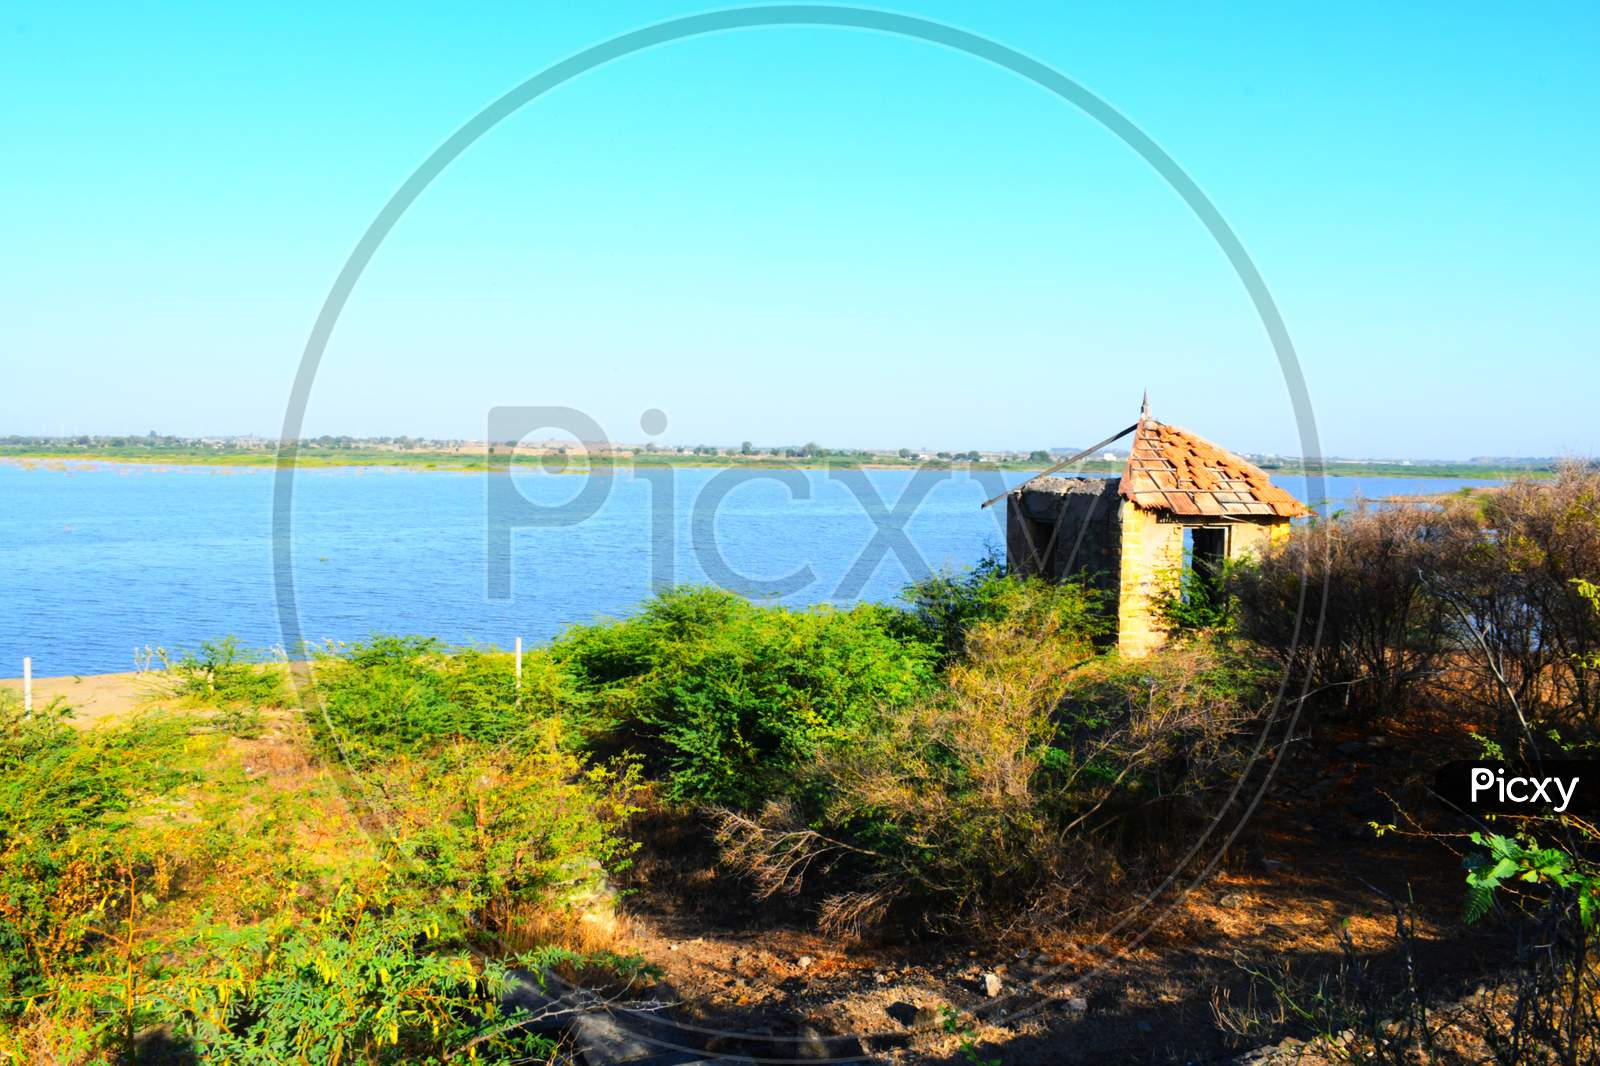 Hut on banks of the river of India, old hut, Little old house on banks of the river at sunset in silence